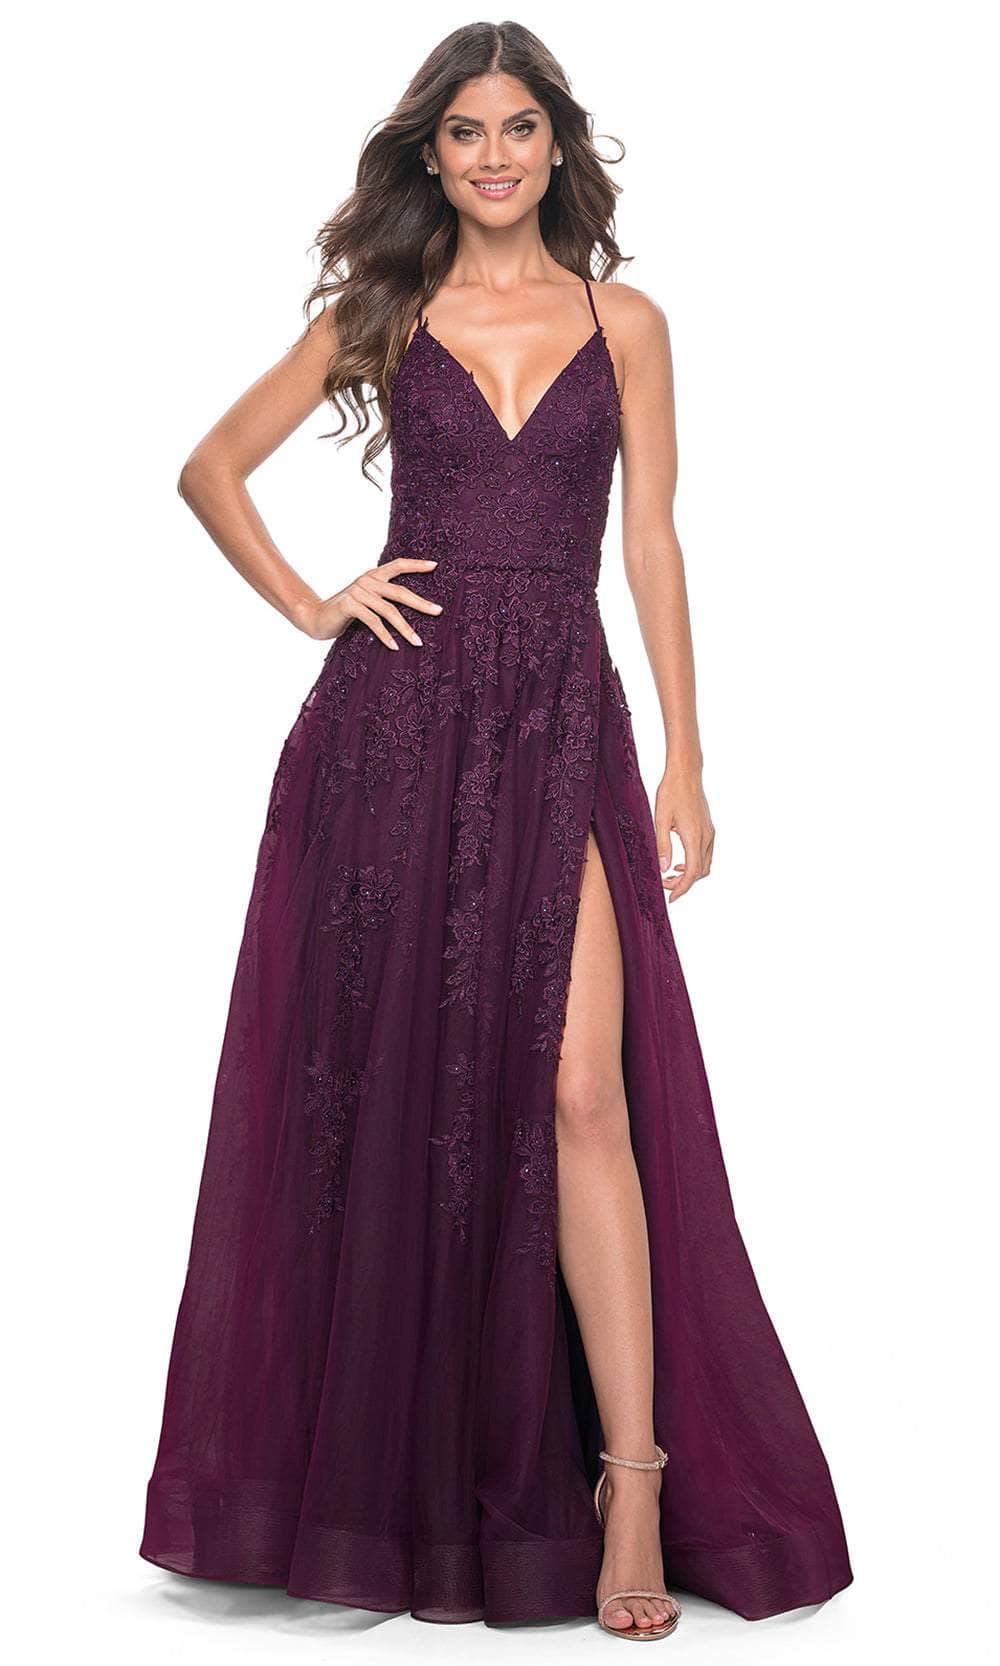 La Femme 32303 - V-Neck Embroidered Tulle Prom Gown
